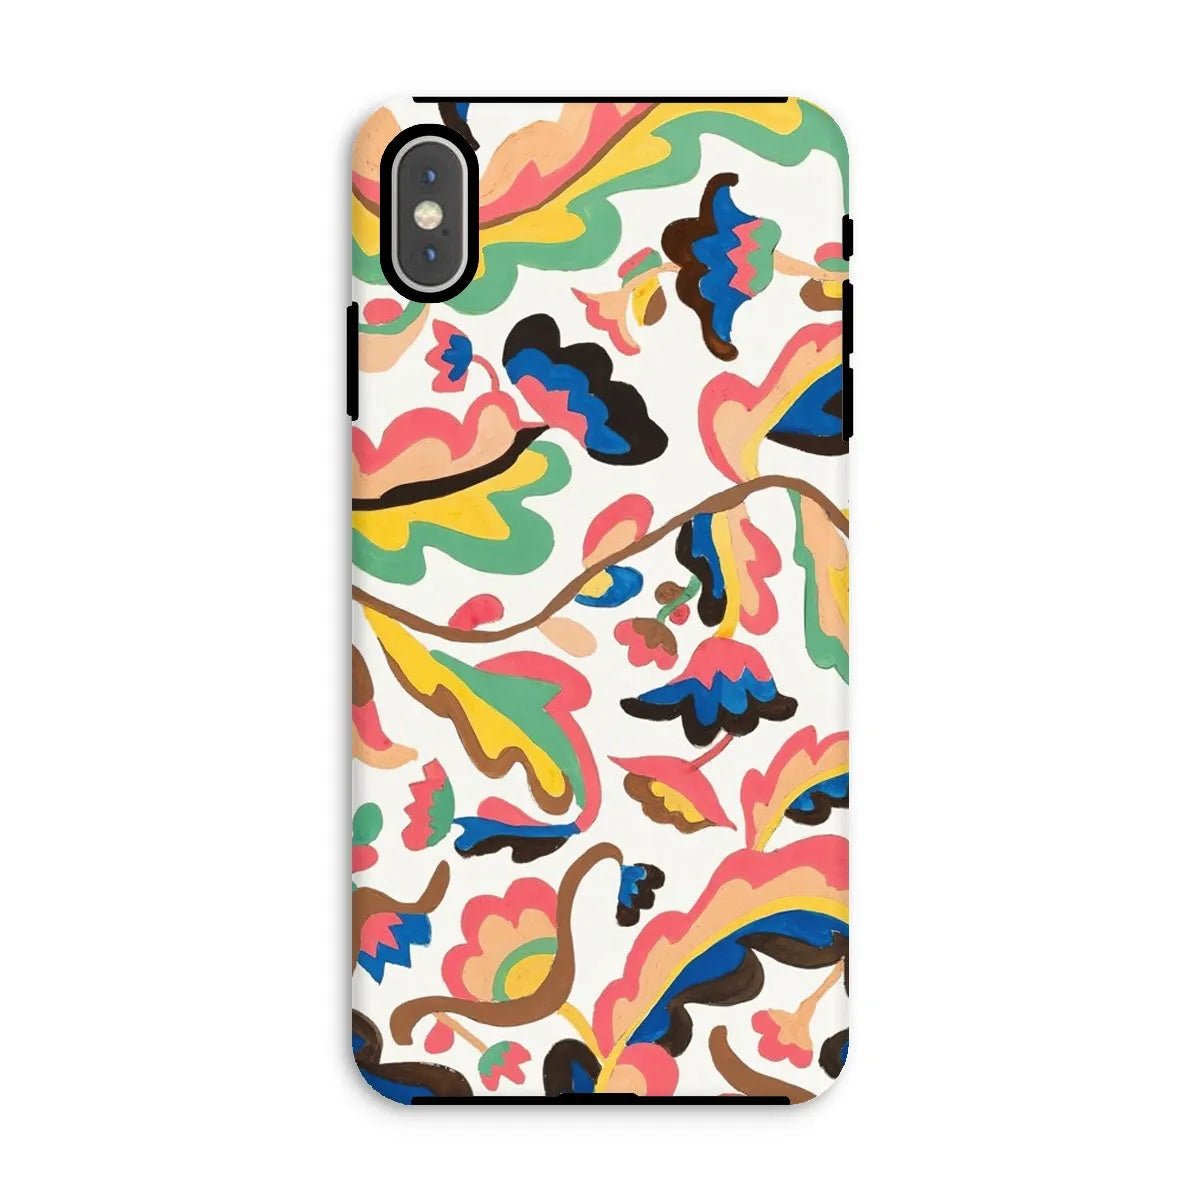 Colcha Floral Aesthetic Pattern Phone Case - Etna Wiswall - Iphone Xs Max / Matte - Mobile Phone Cases - Aesthetic Art